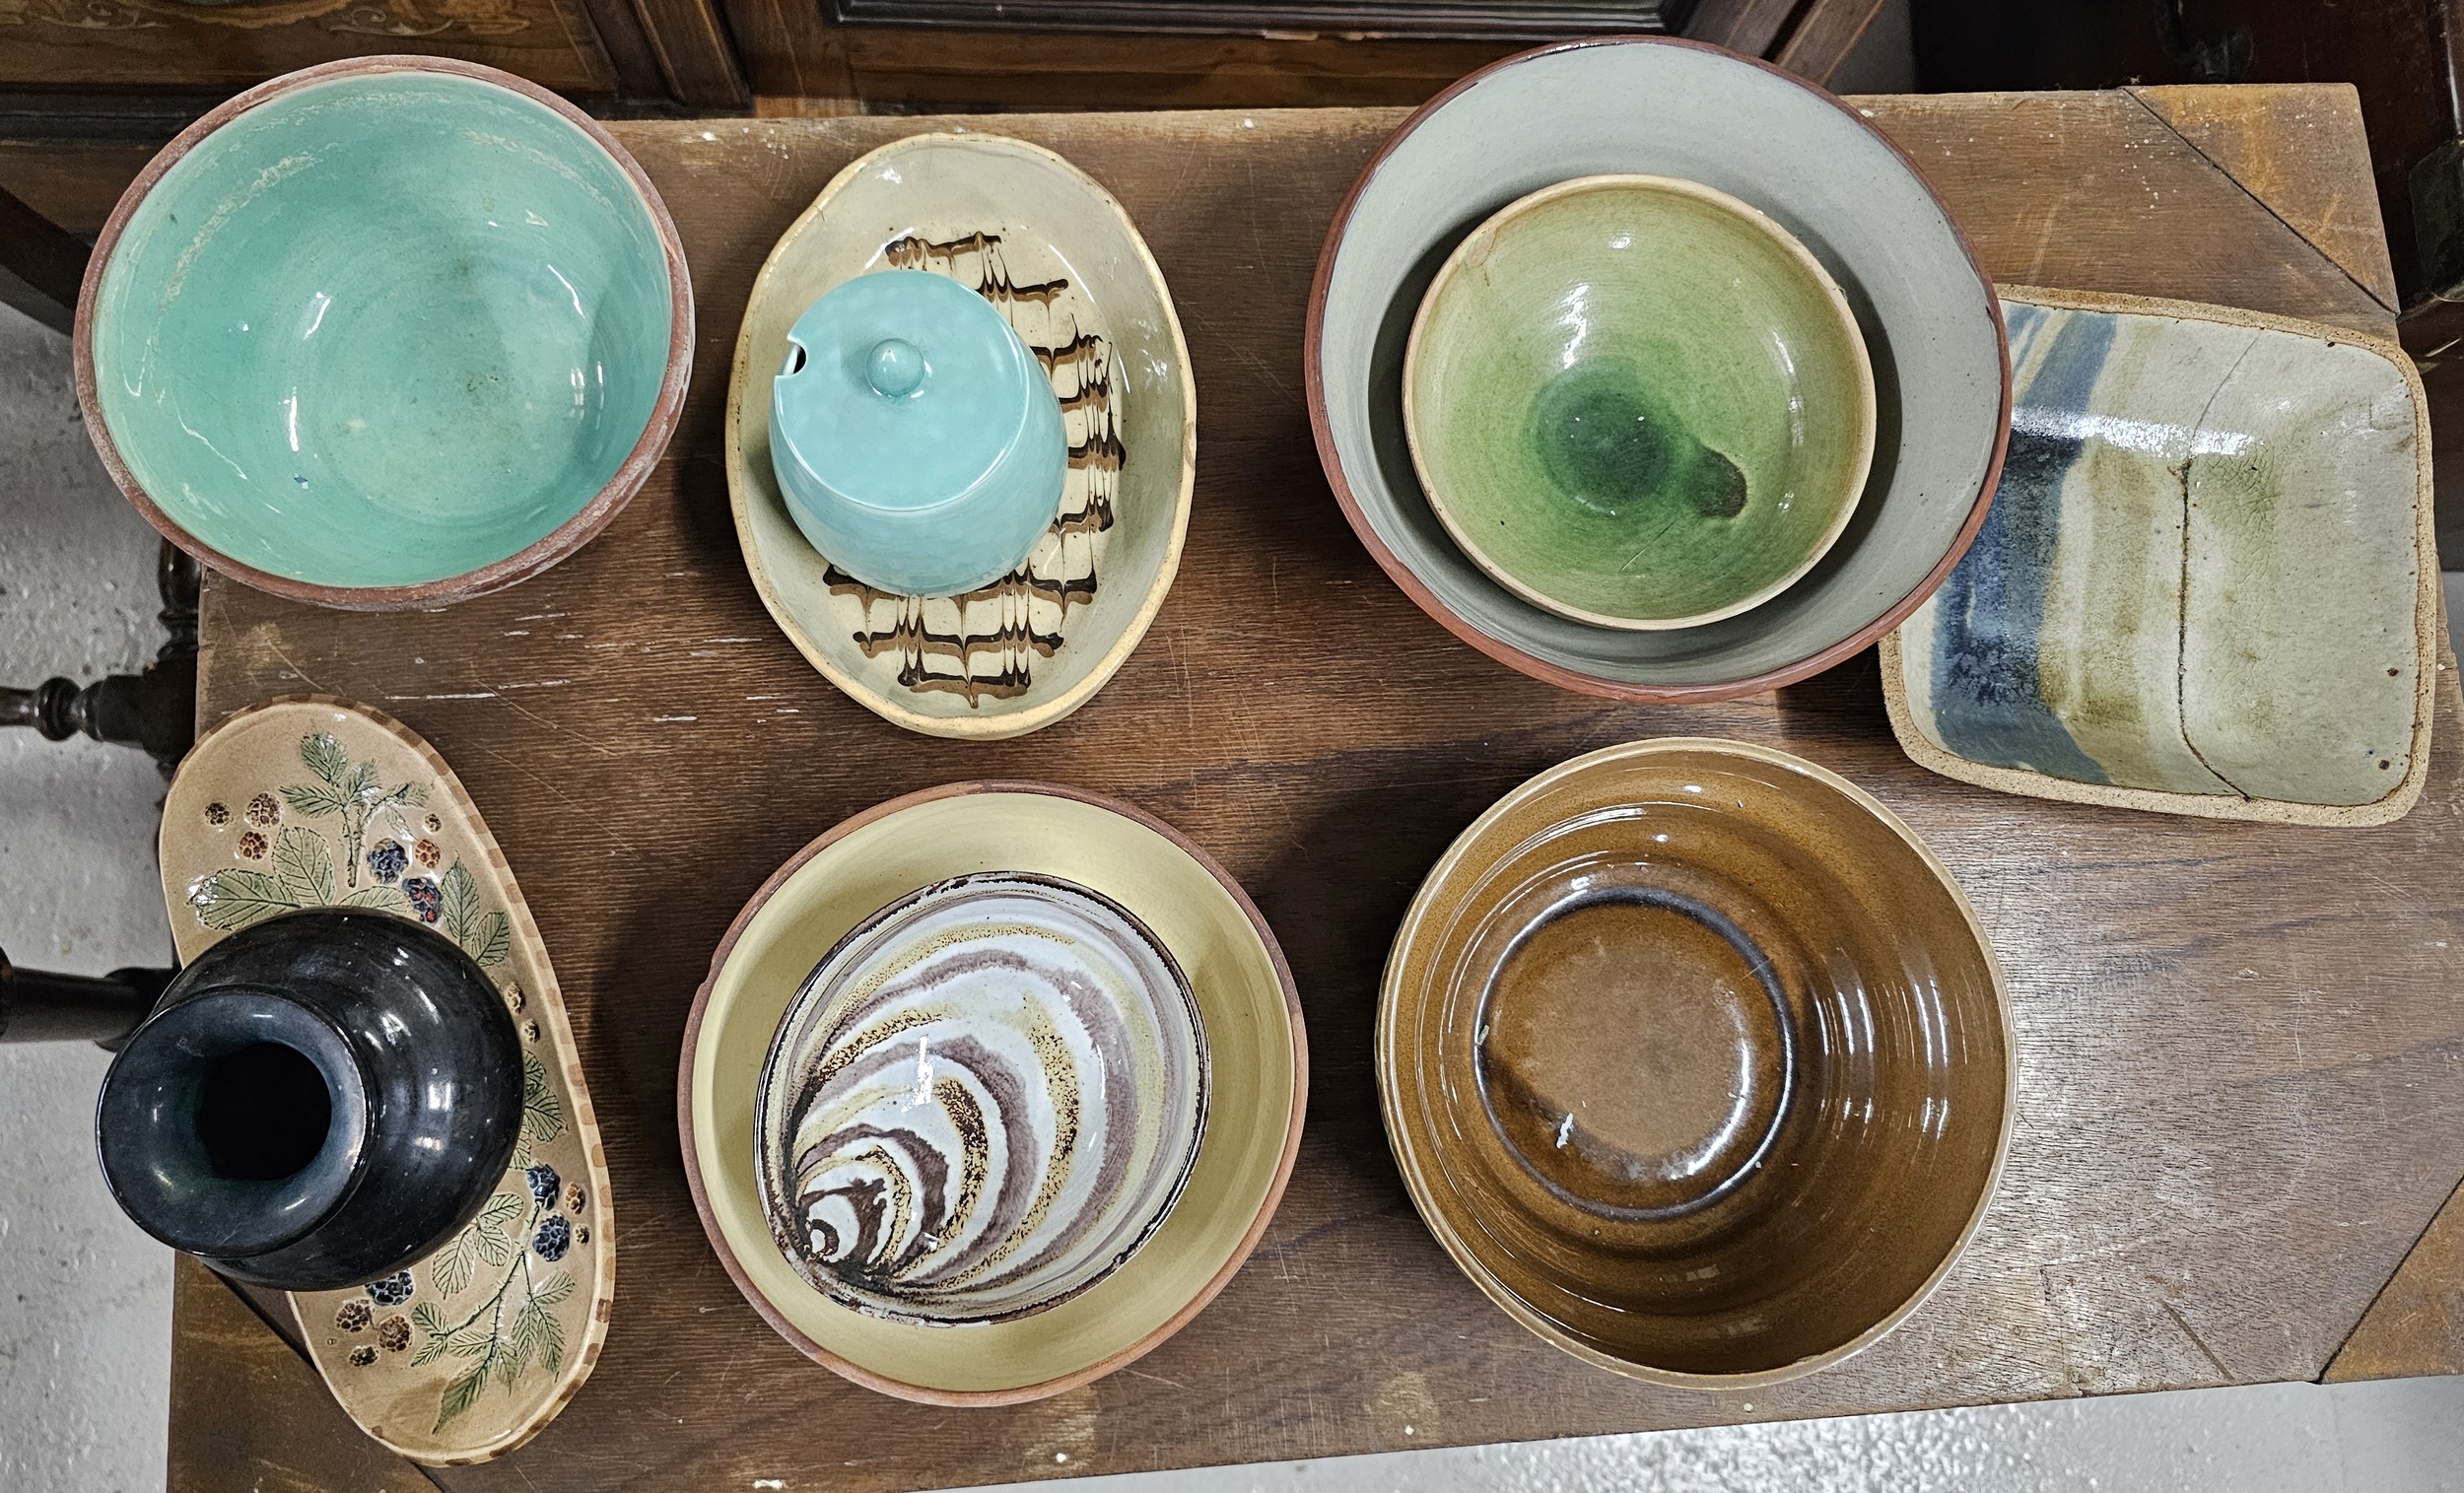 A collection of studio pottery. Largest bowl has a 22cm circumference.